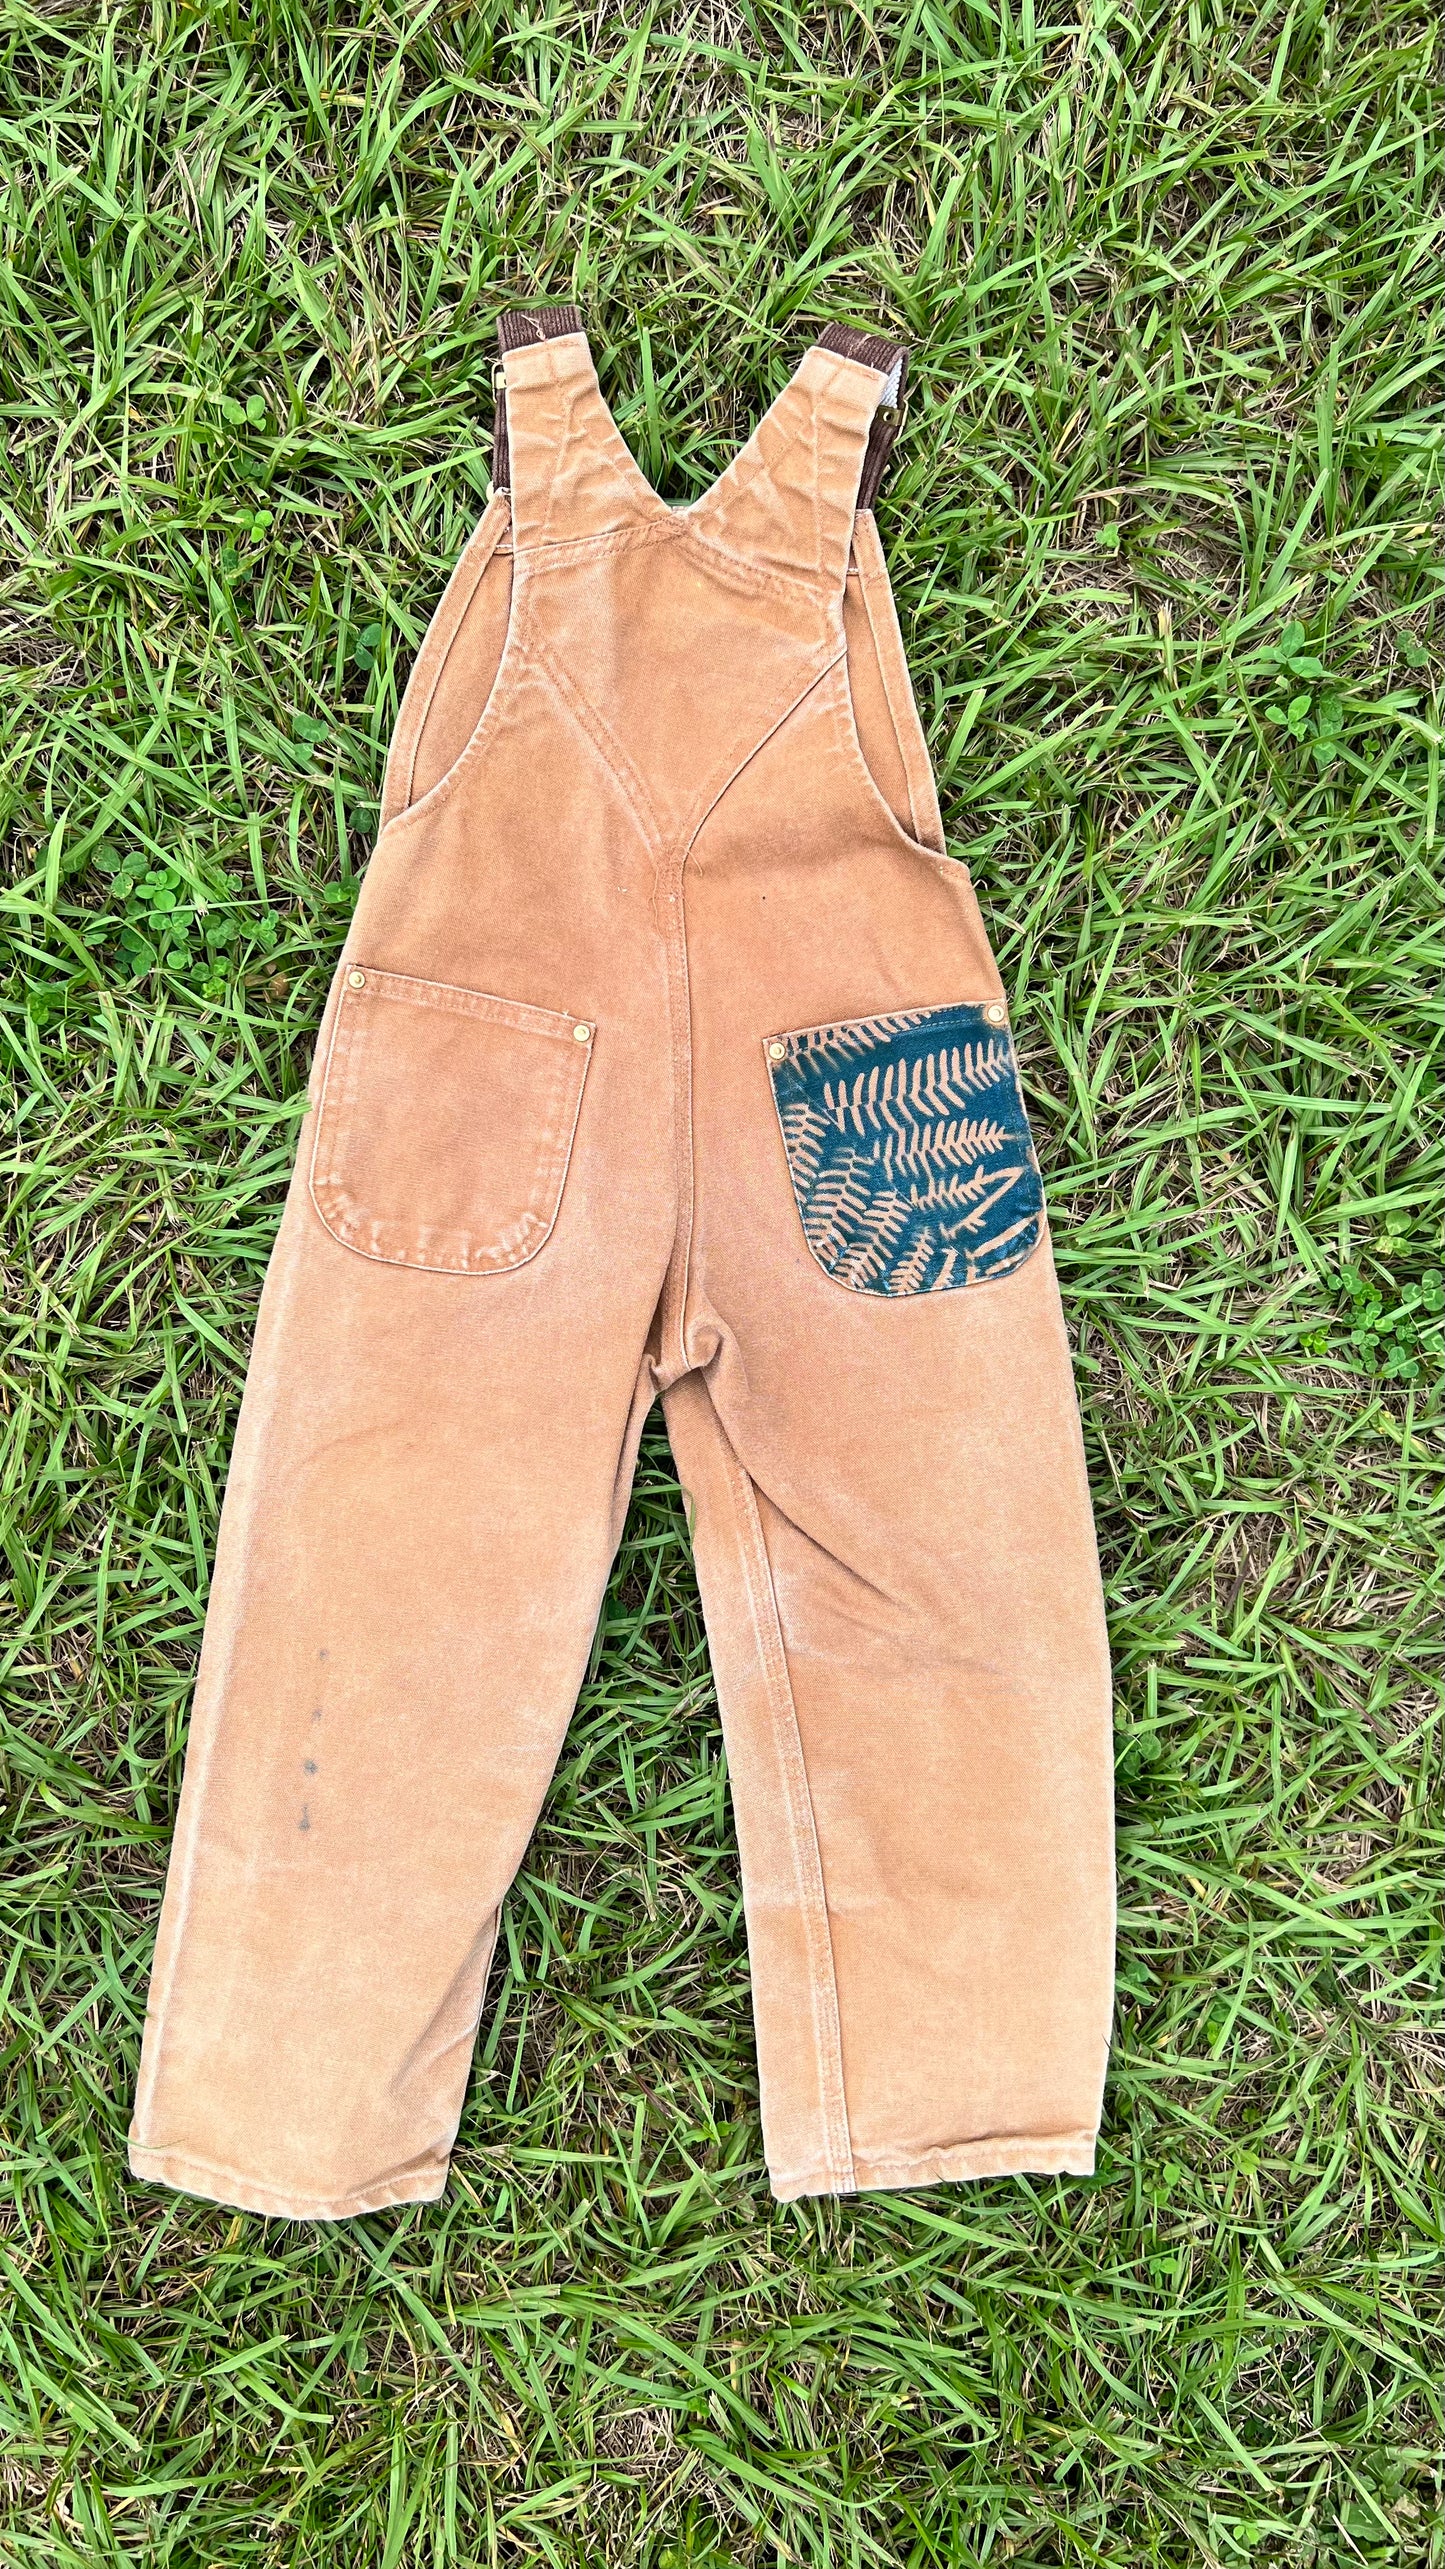 Carhartt Vintage Tan Overalls • Youth 7-8